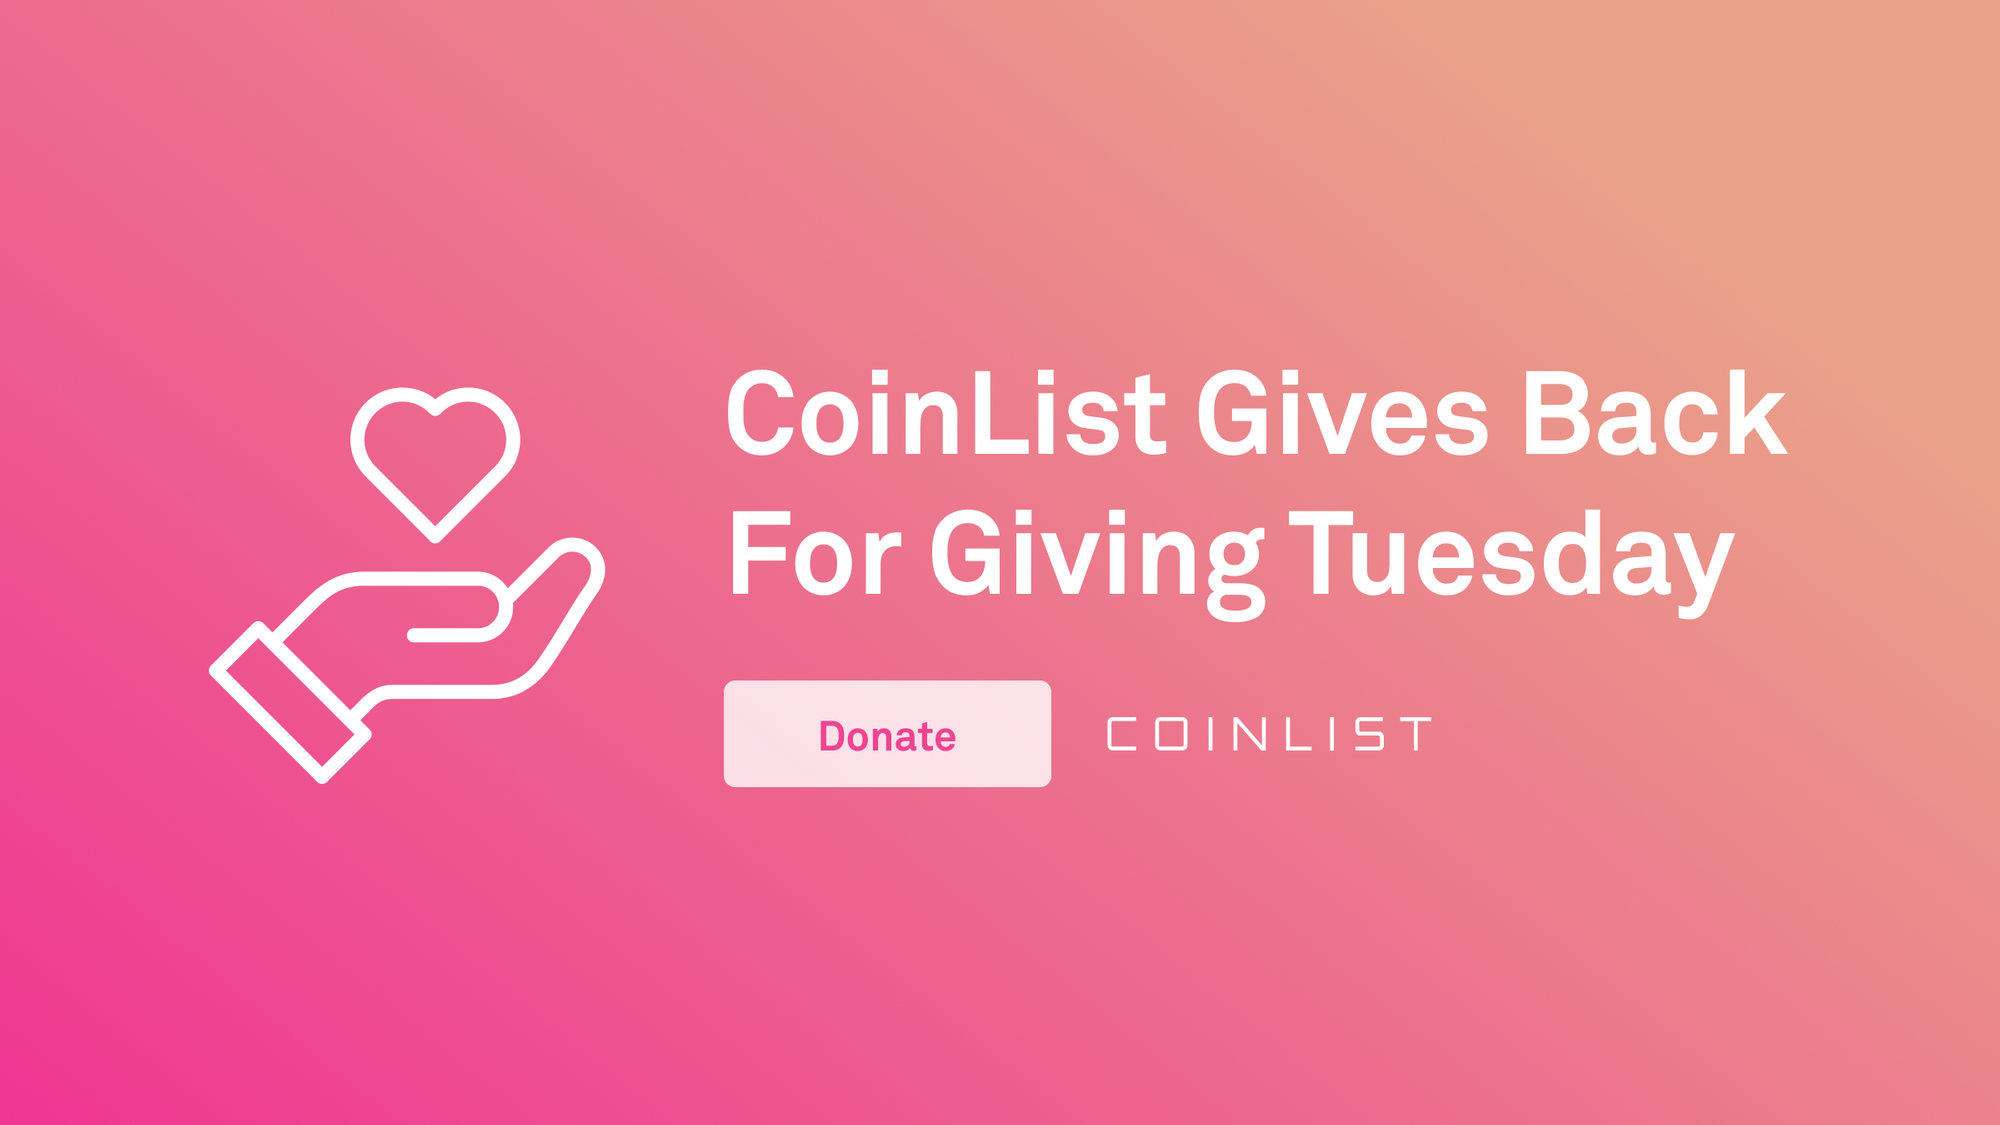 CoinList Gives Back For Giving Tuesday